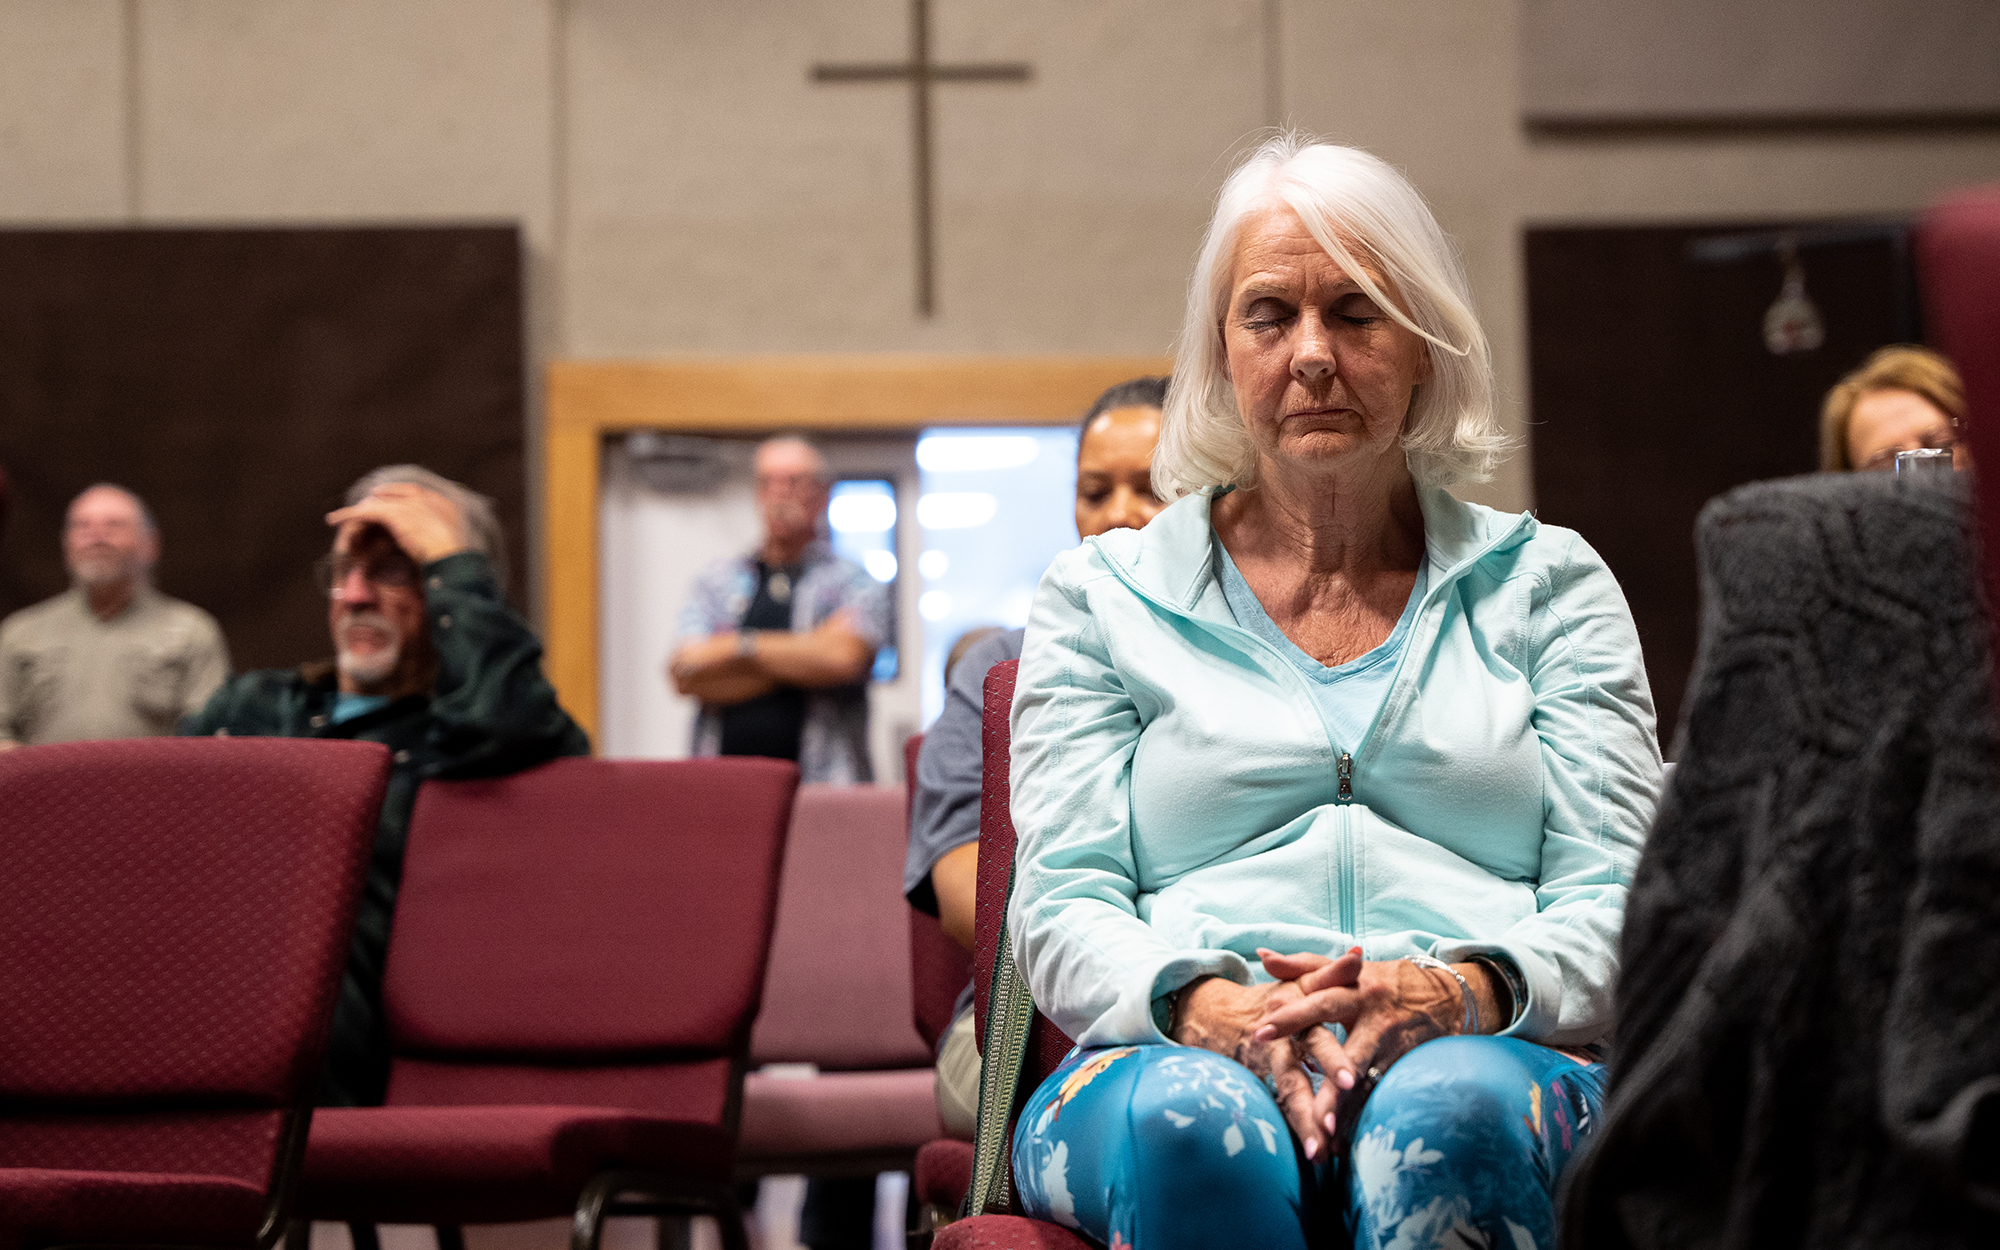 Elizabeth Vander Meer prays at a Sanctuary Cities for the Unborn meeting at Vineyard Church of Prescott Valley. (Photo by Mingson Lau/News21)